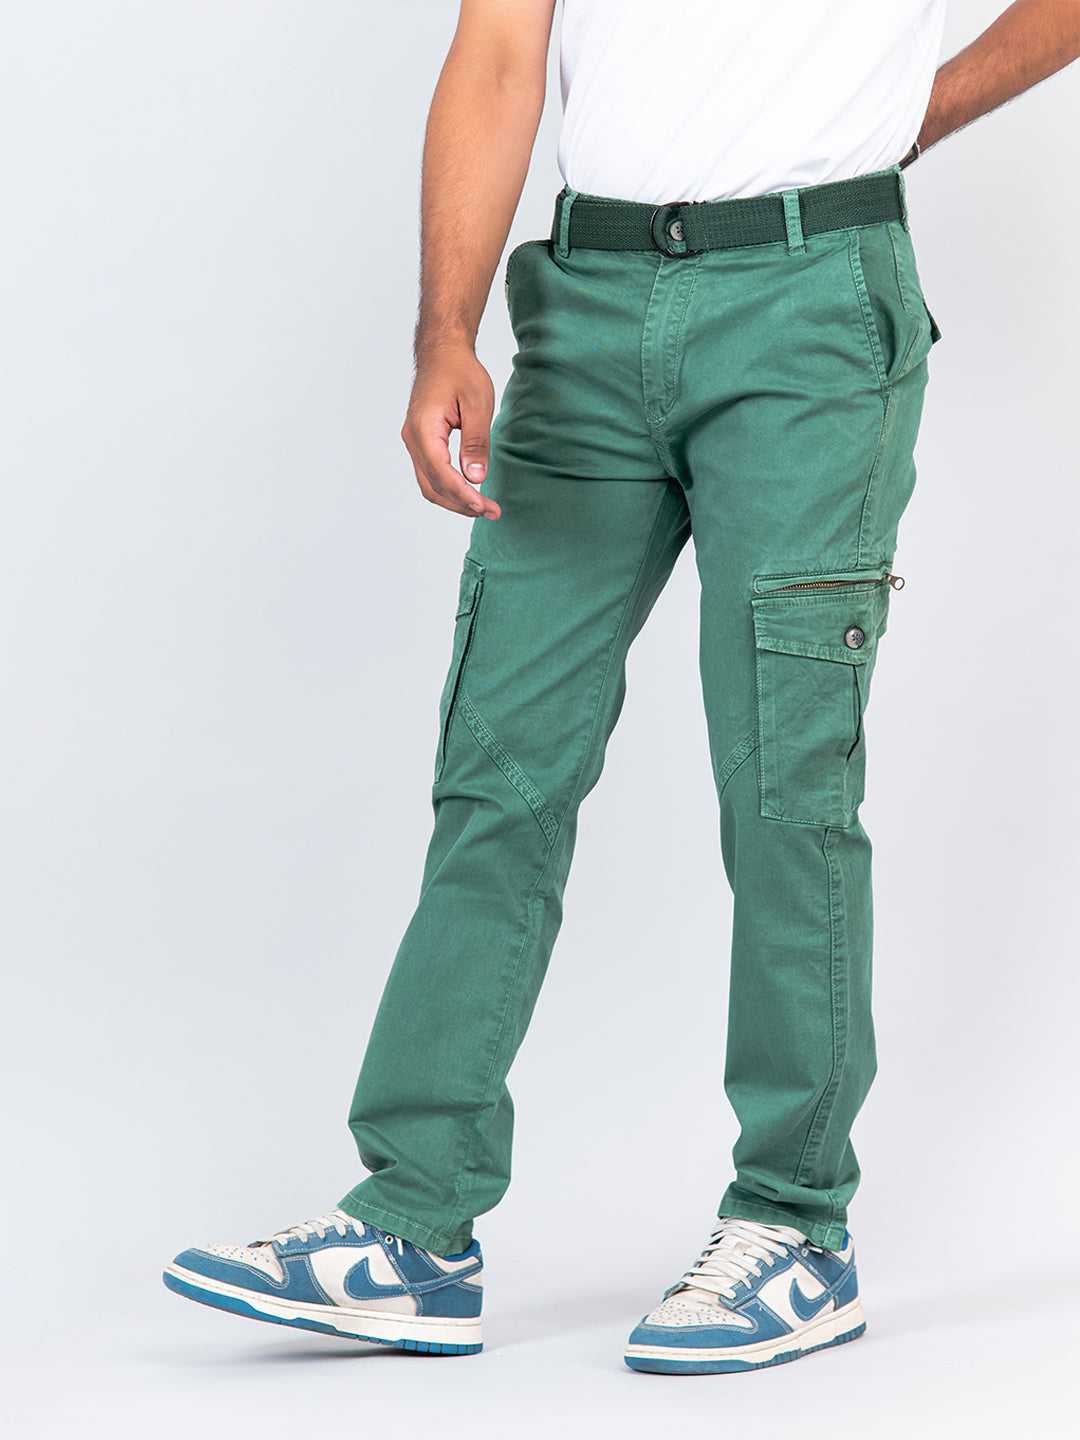 Buy Steel Grey Gap Twill Cotton Mens Cargo Pants Online At Best Prices   Tistabene